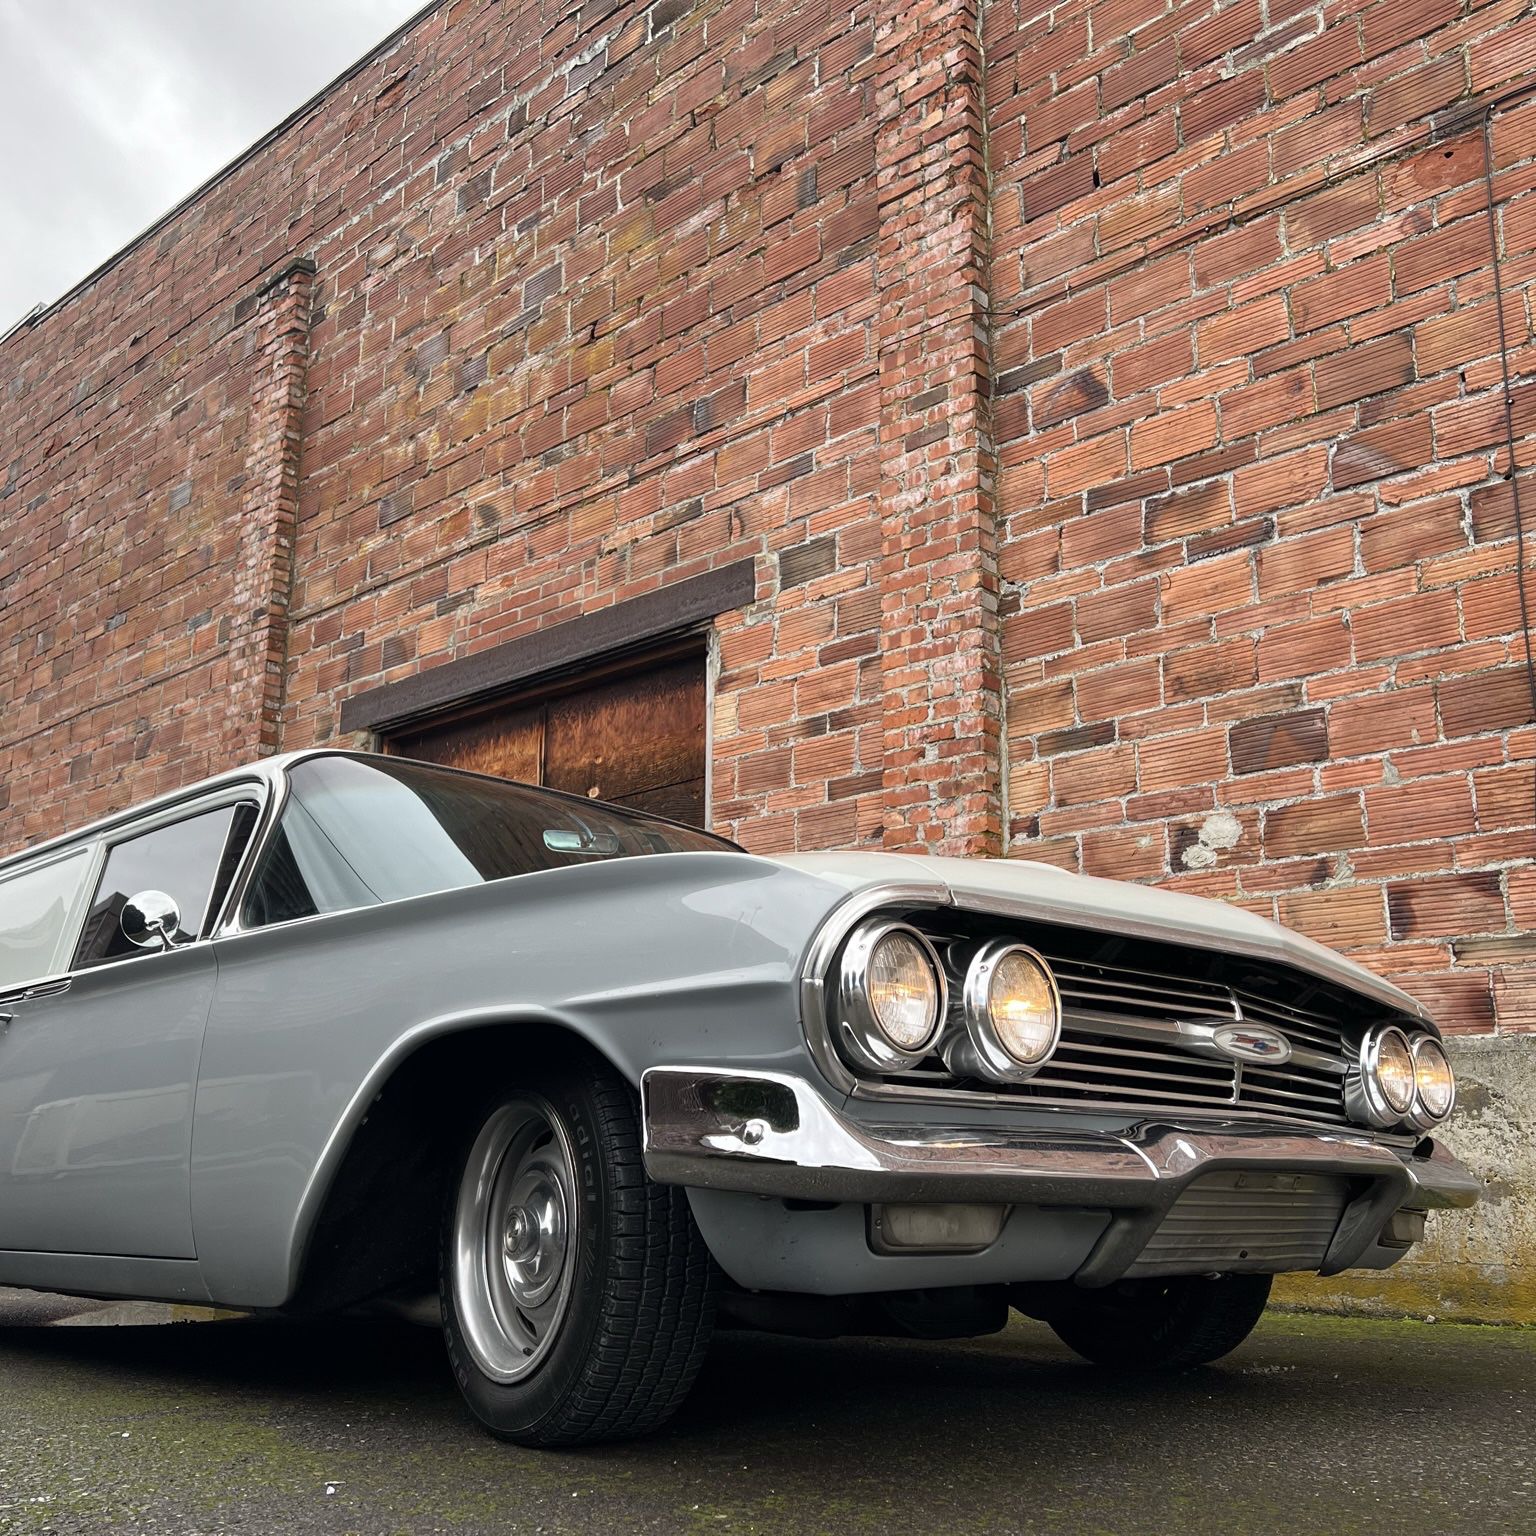 Rare Classic - 1960 Chevy Impala Delivery - Big Block 409, Power Steering, 4-Speed!